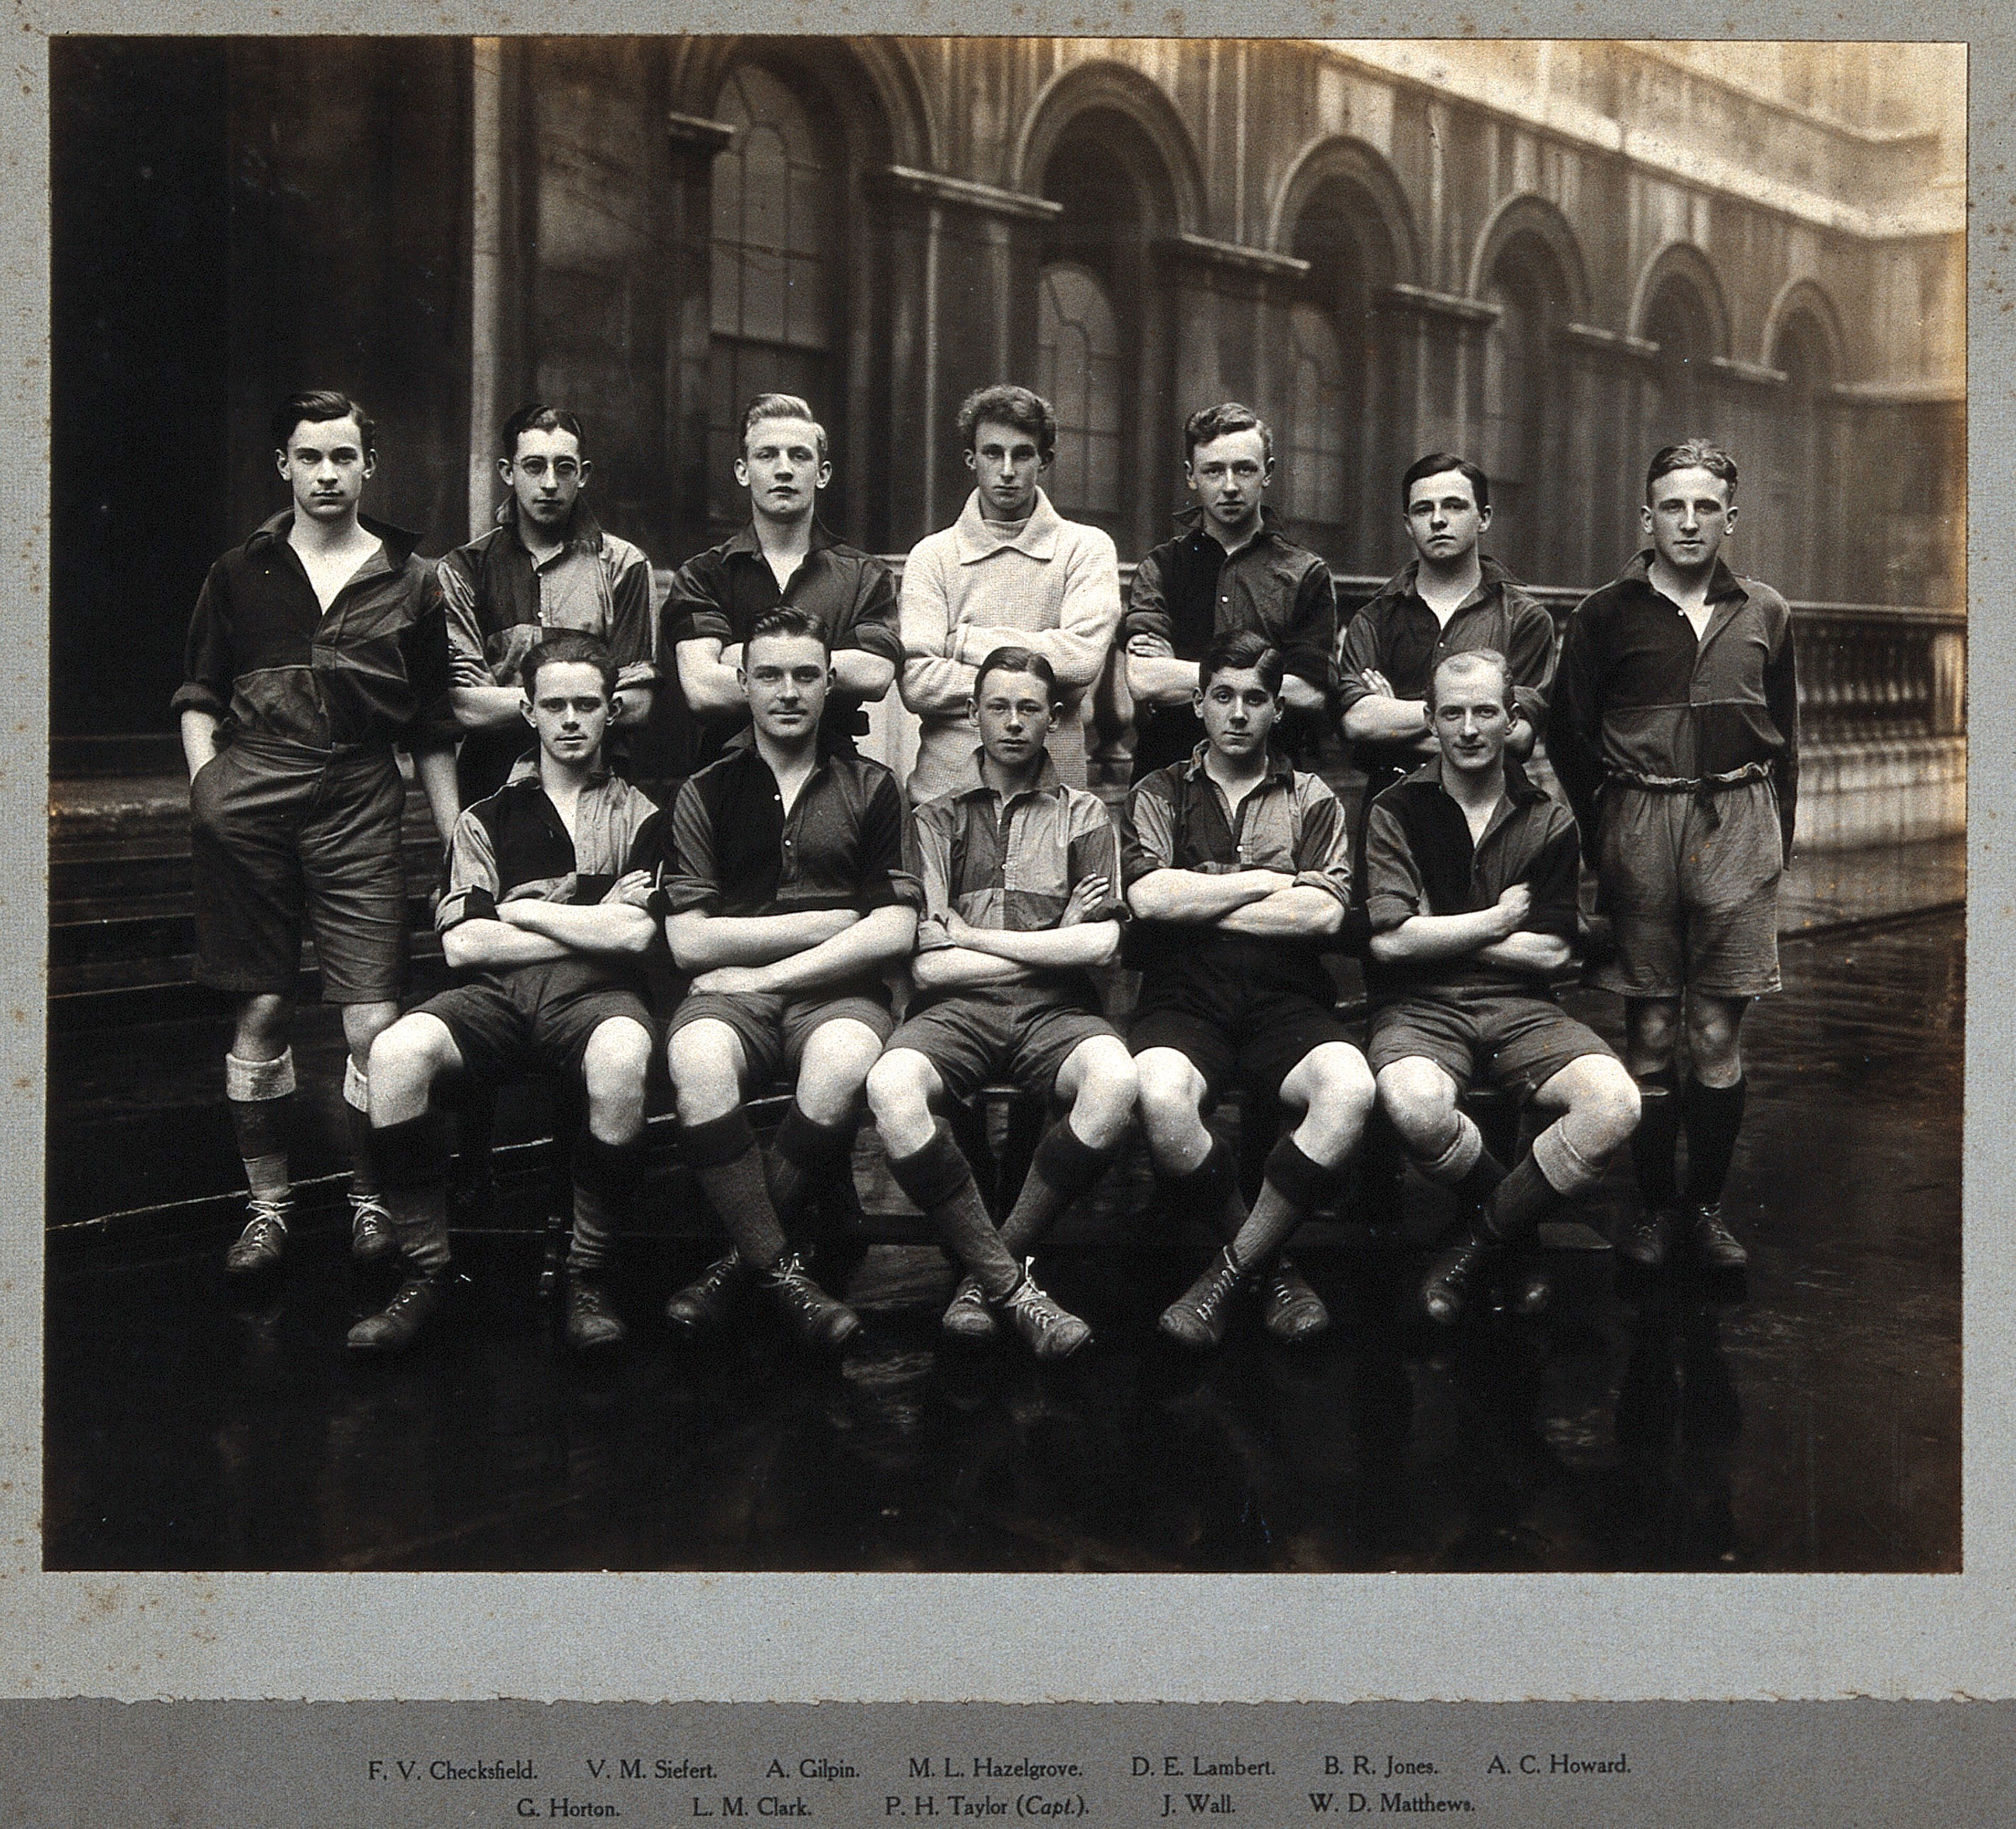 King's College Association Football Club: group portrait of team for the 1923-1924 season. Photograph, ca. 1923.